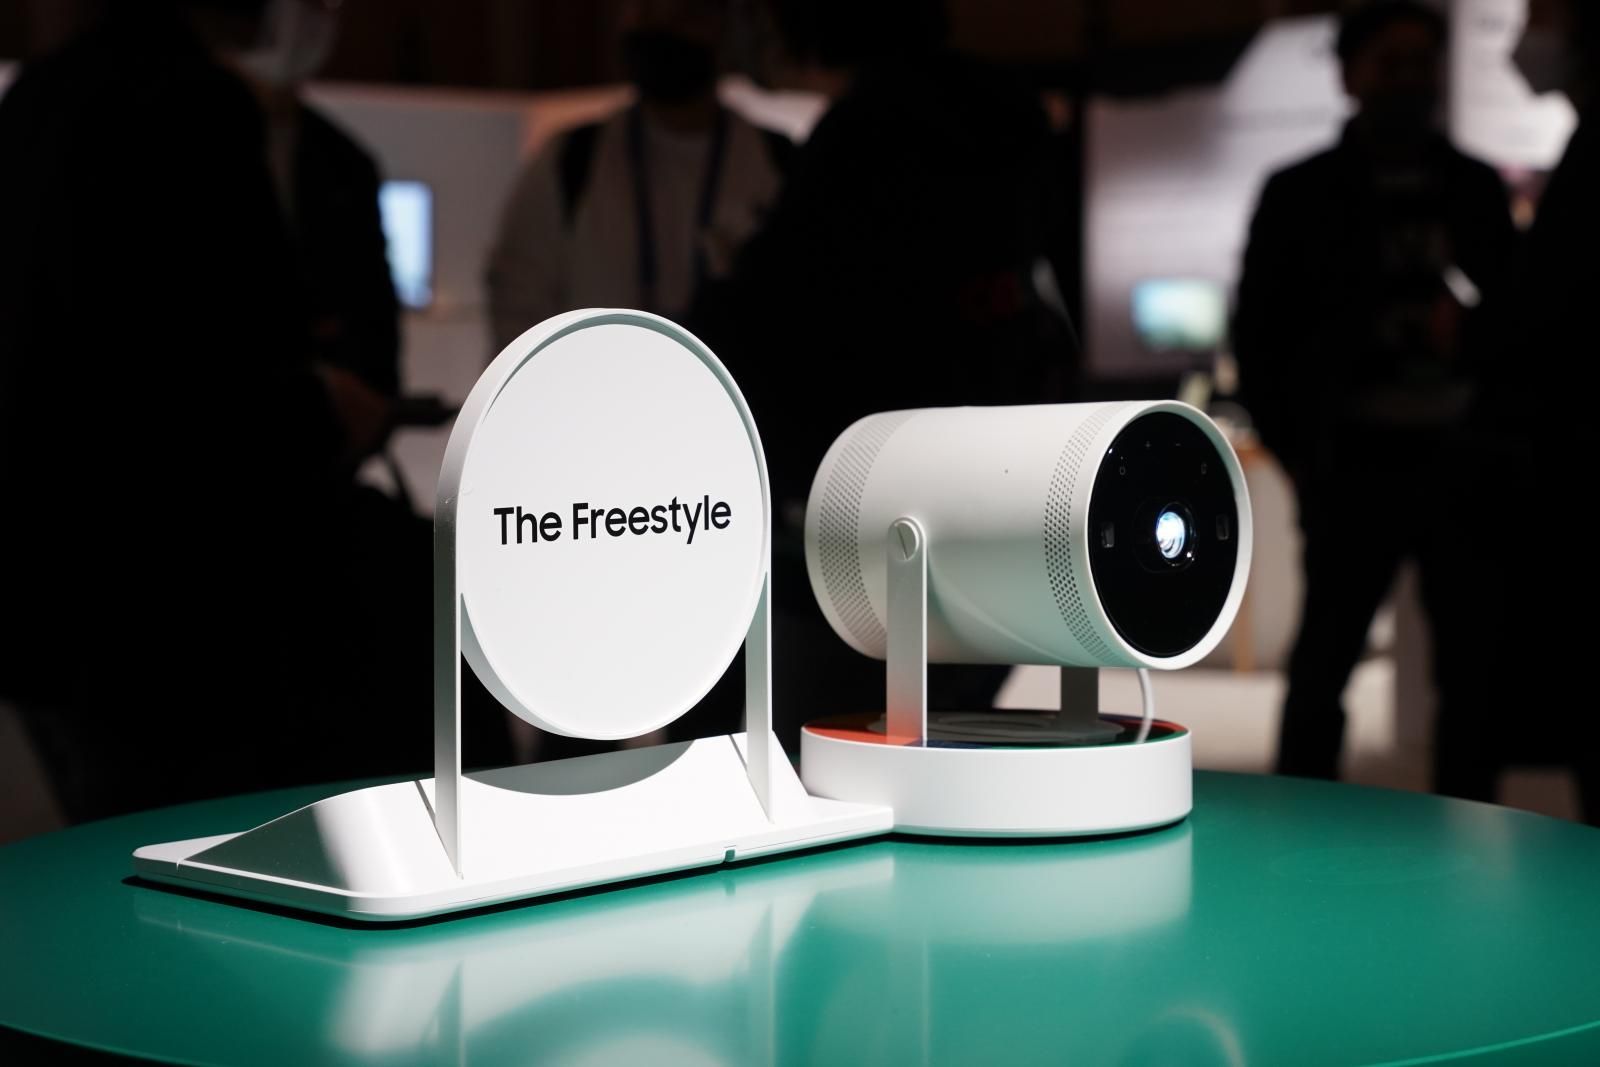 Samsung launches Freestyle A compact projector for entertainment